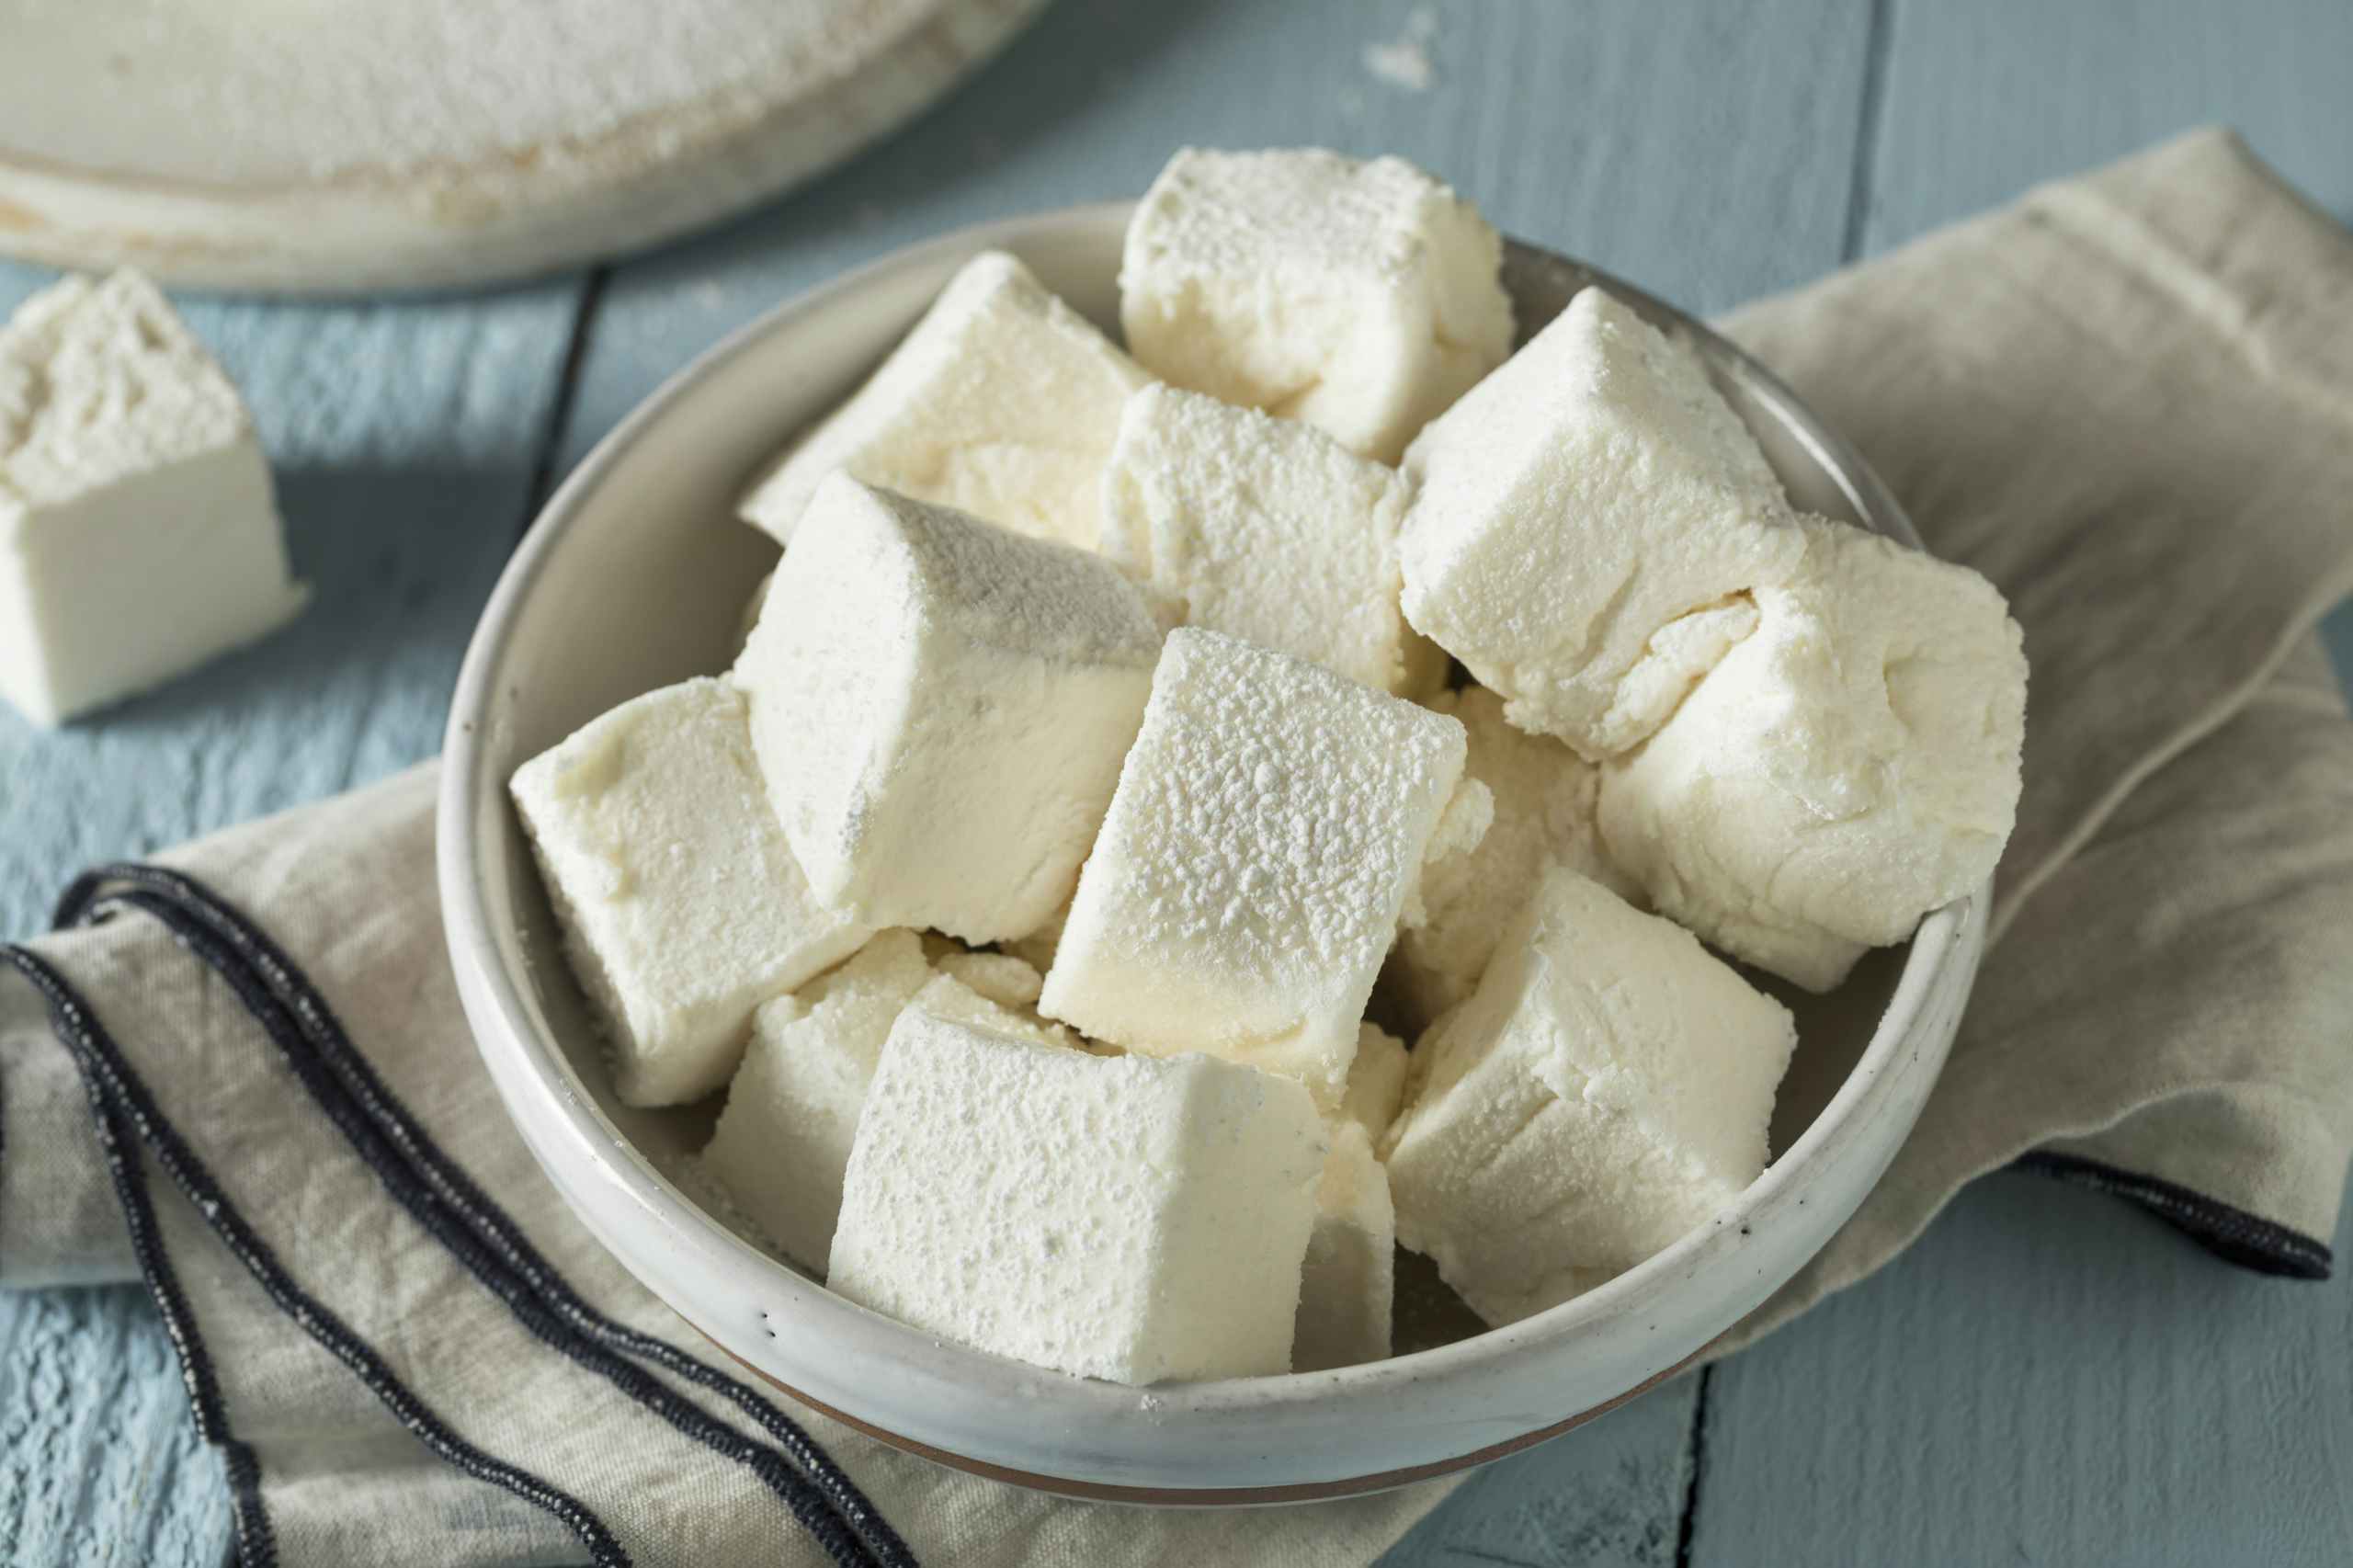 Some homemade marshmallows in a bowl